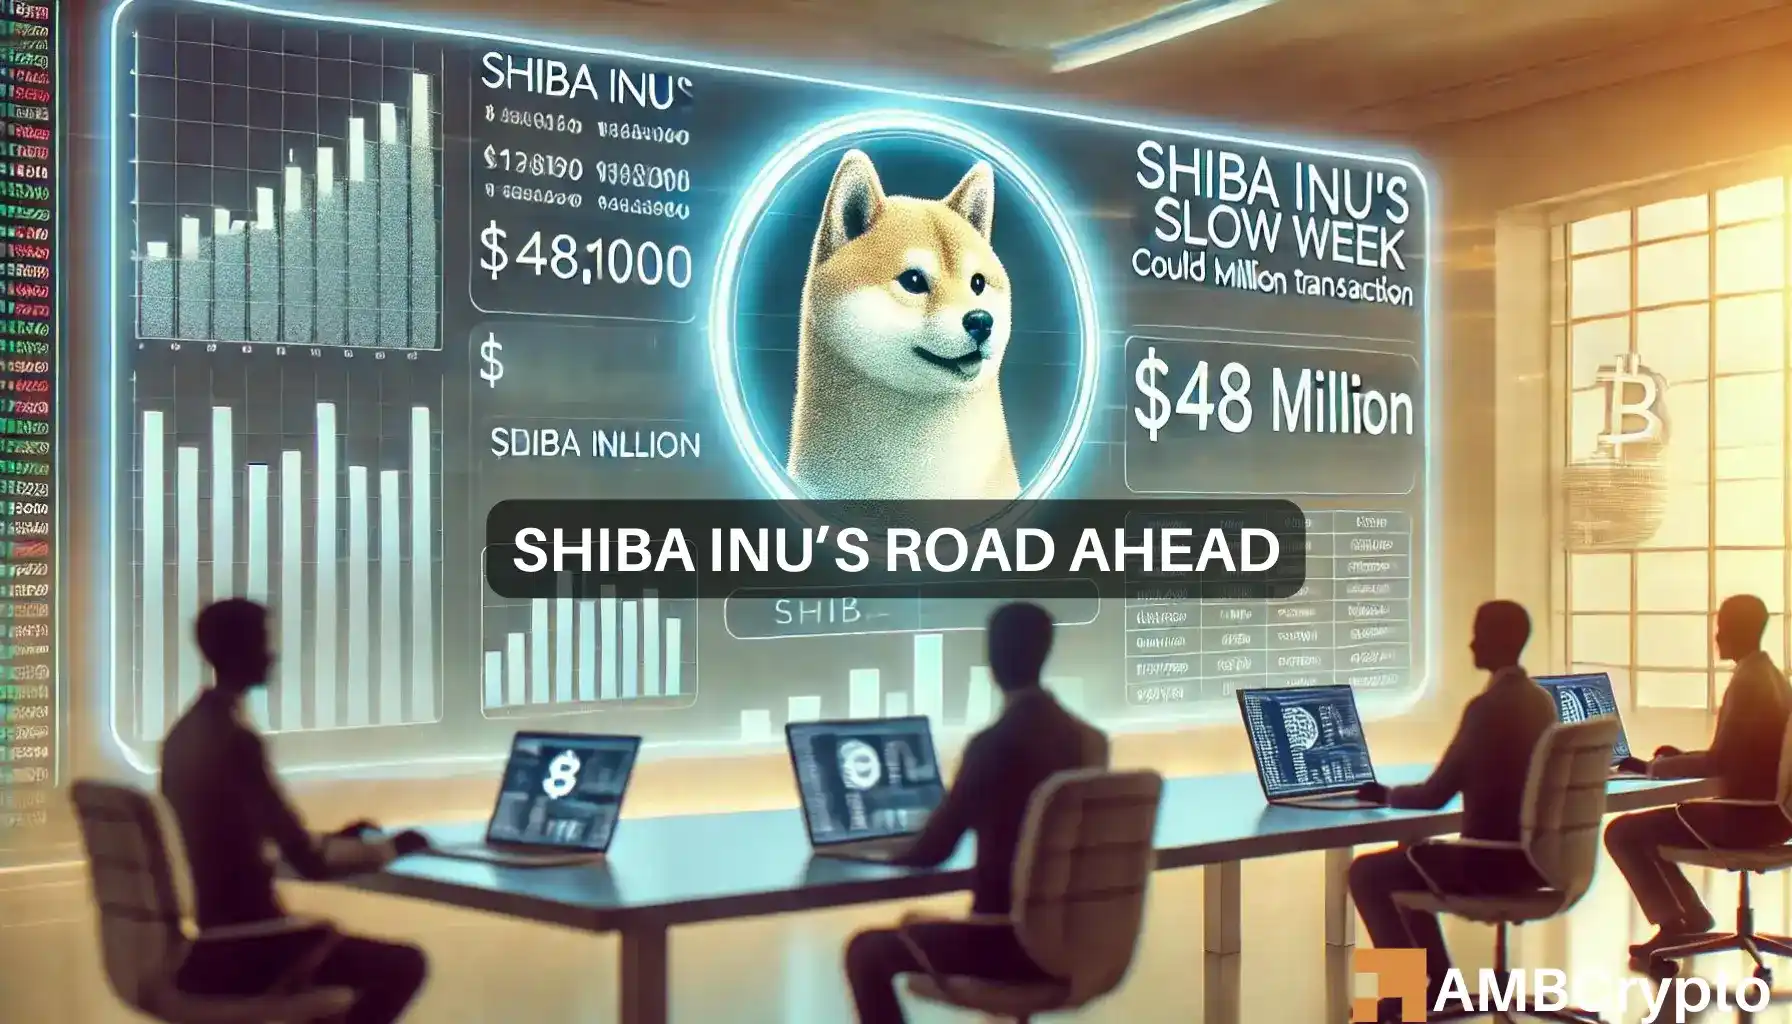 Shiba Inu’s slow week: Could a $48M transaction turn the tide?